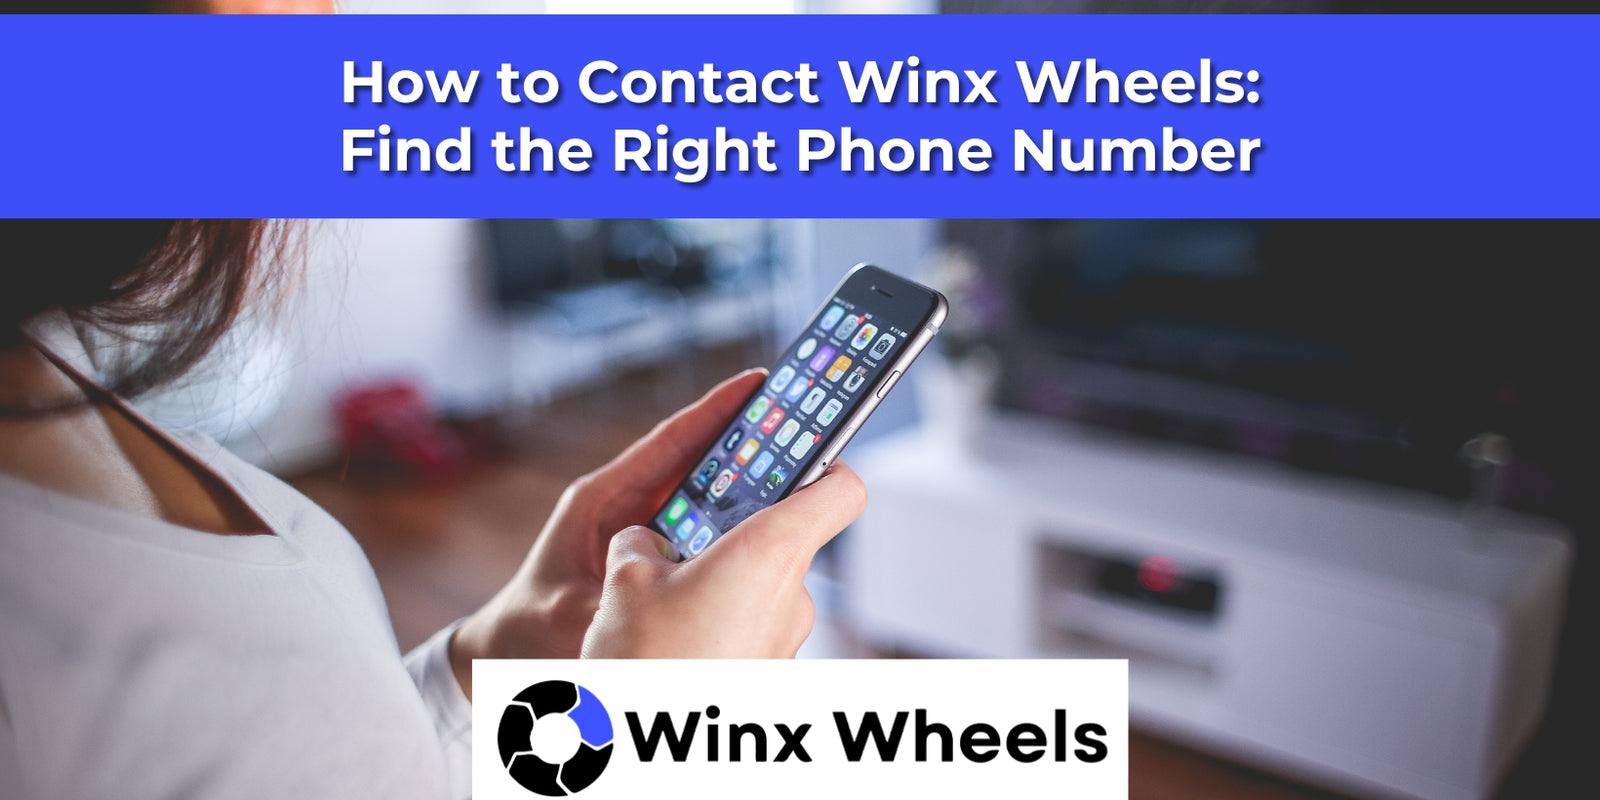 How to Contact Winx Wheels: Find the Right Phone Number